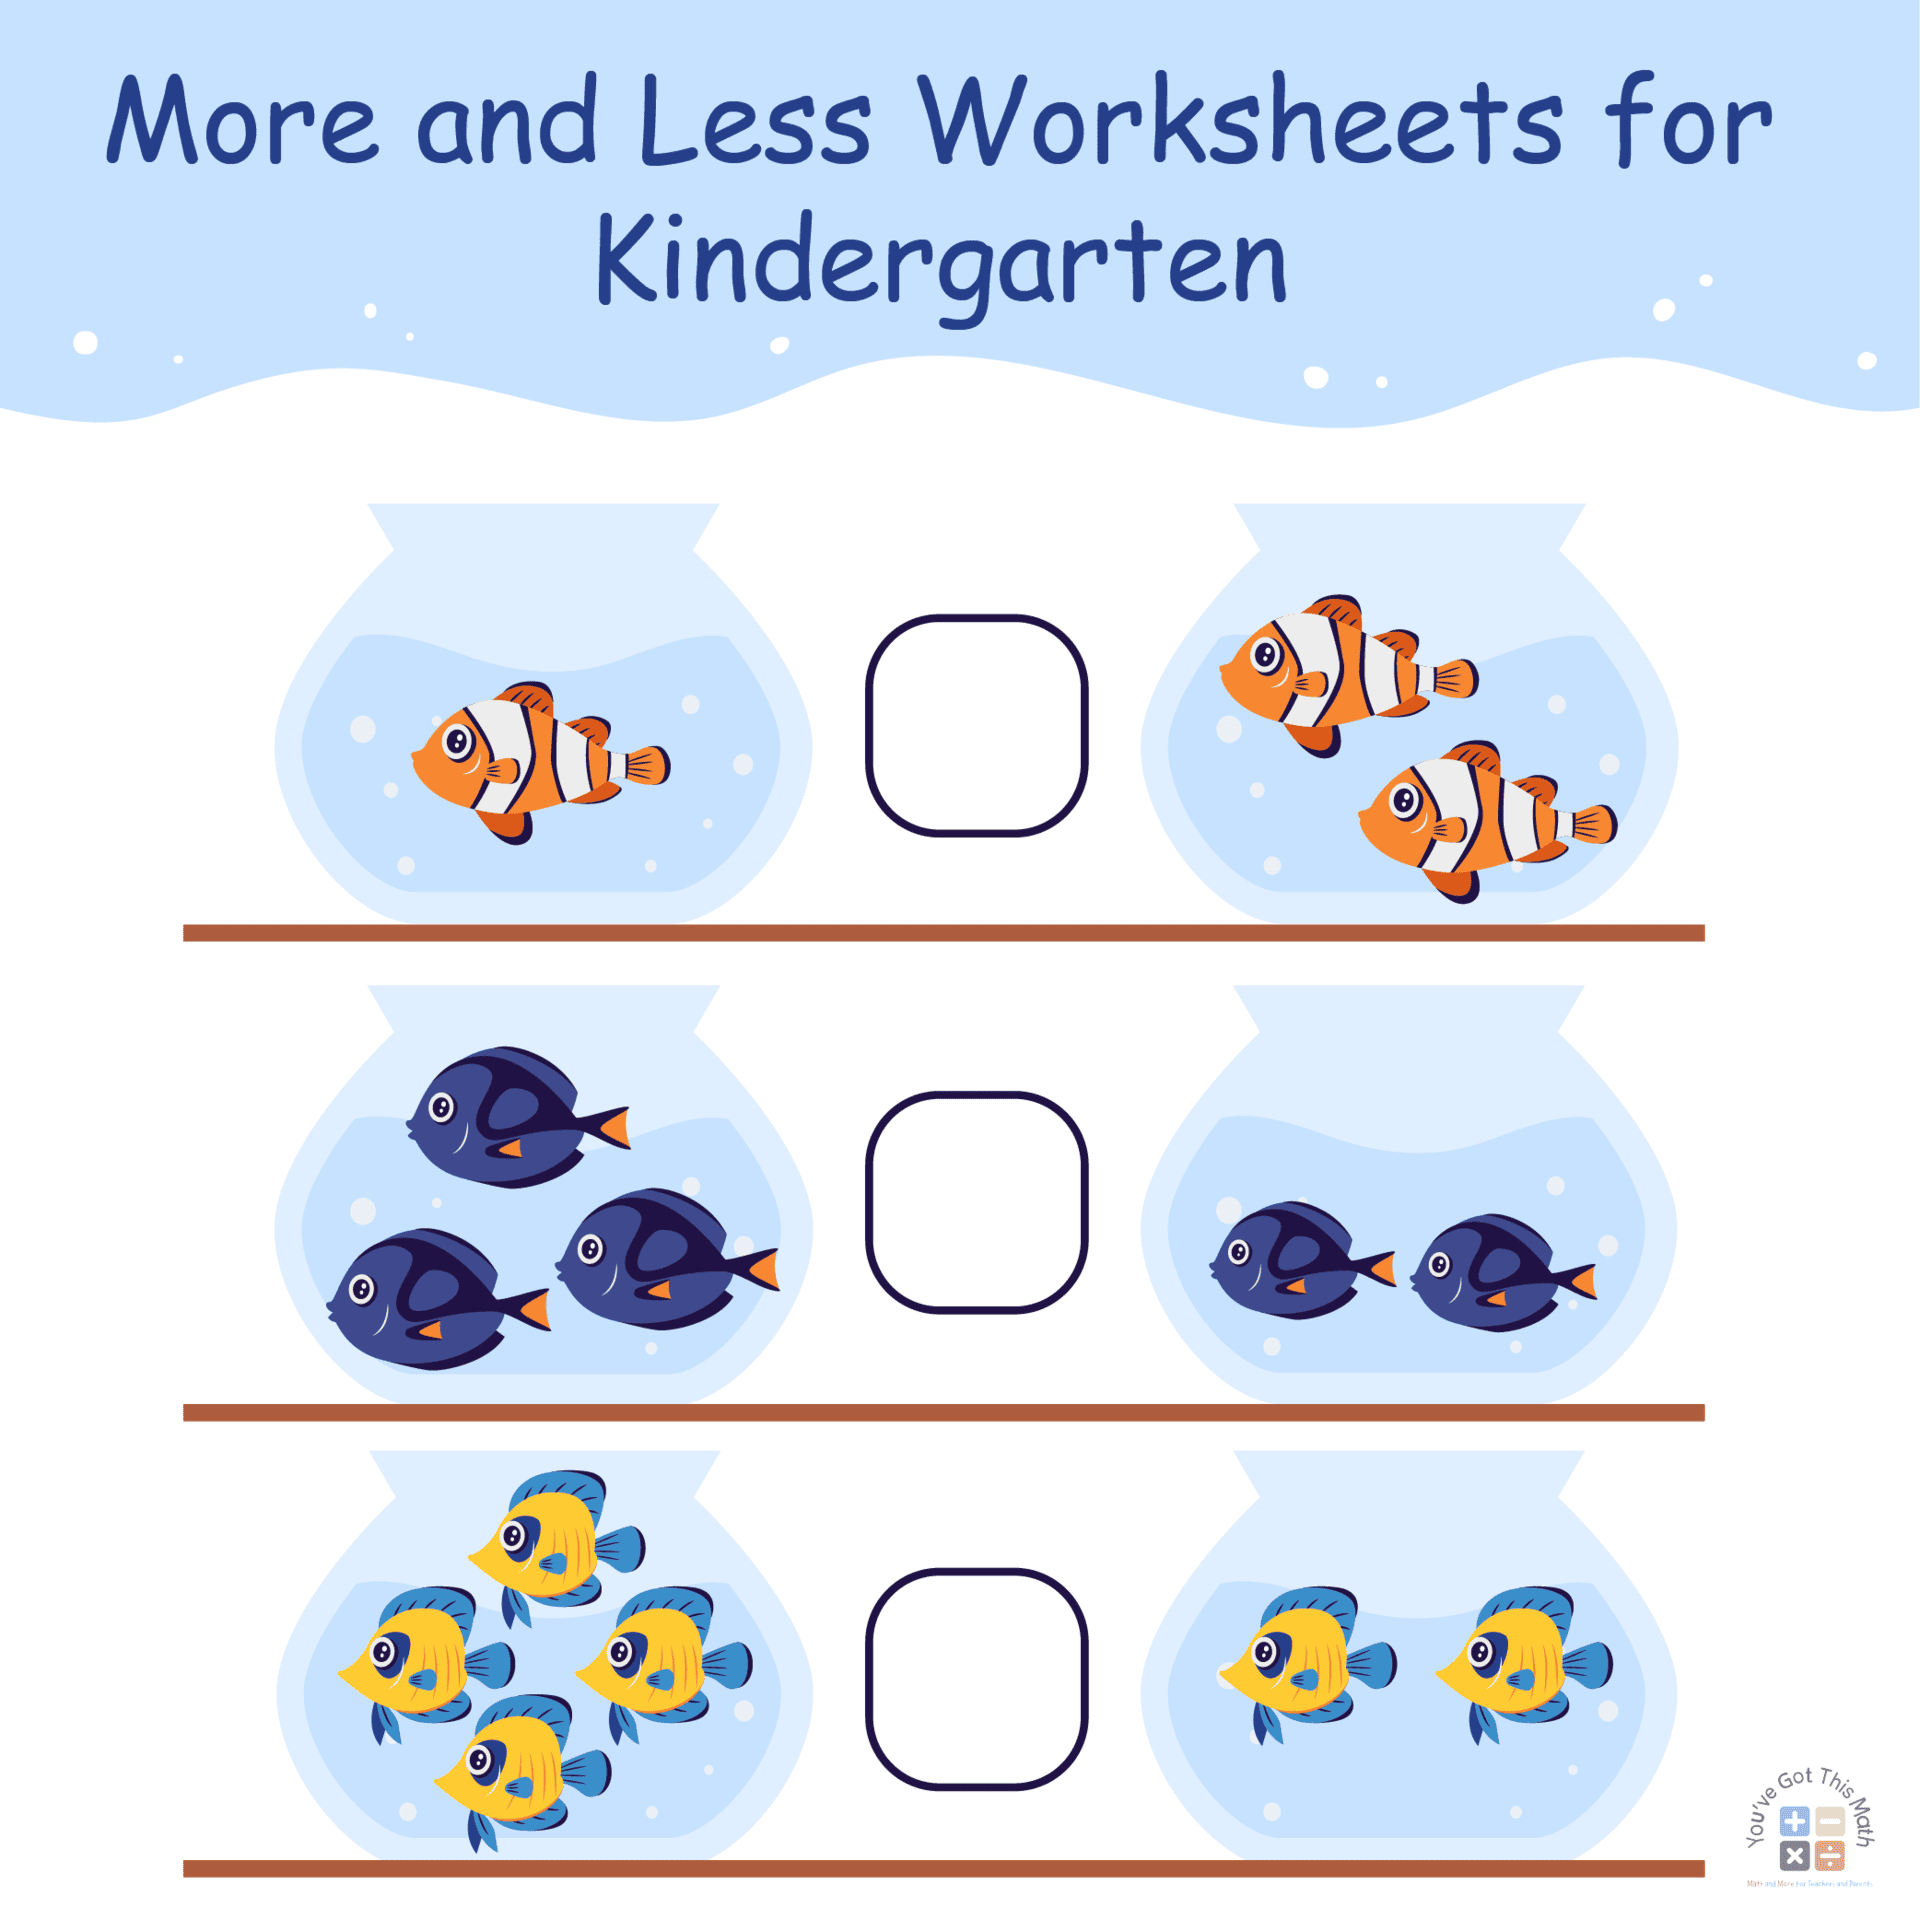 10 Free More and Less Worksheets for Kindergarten